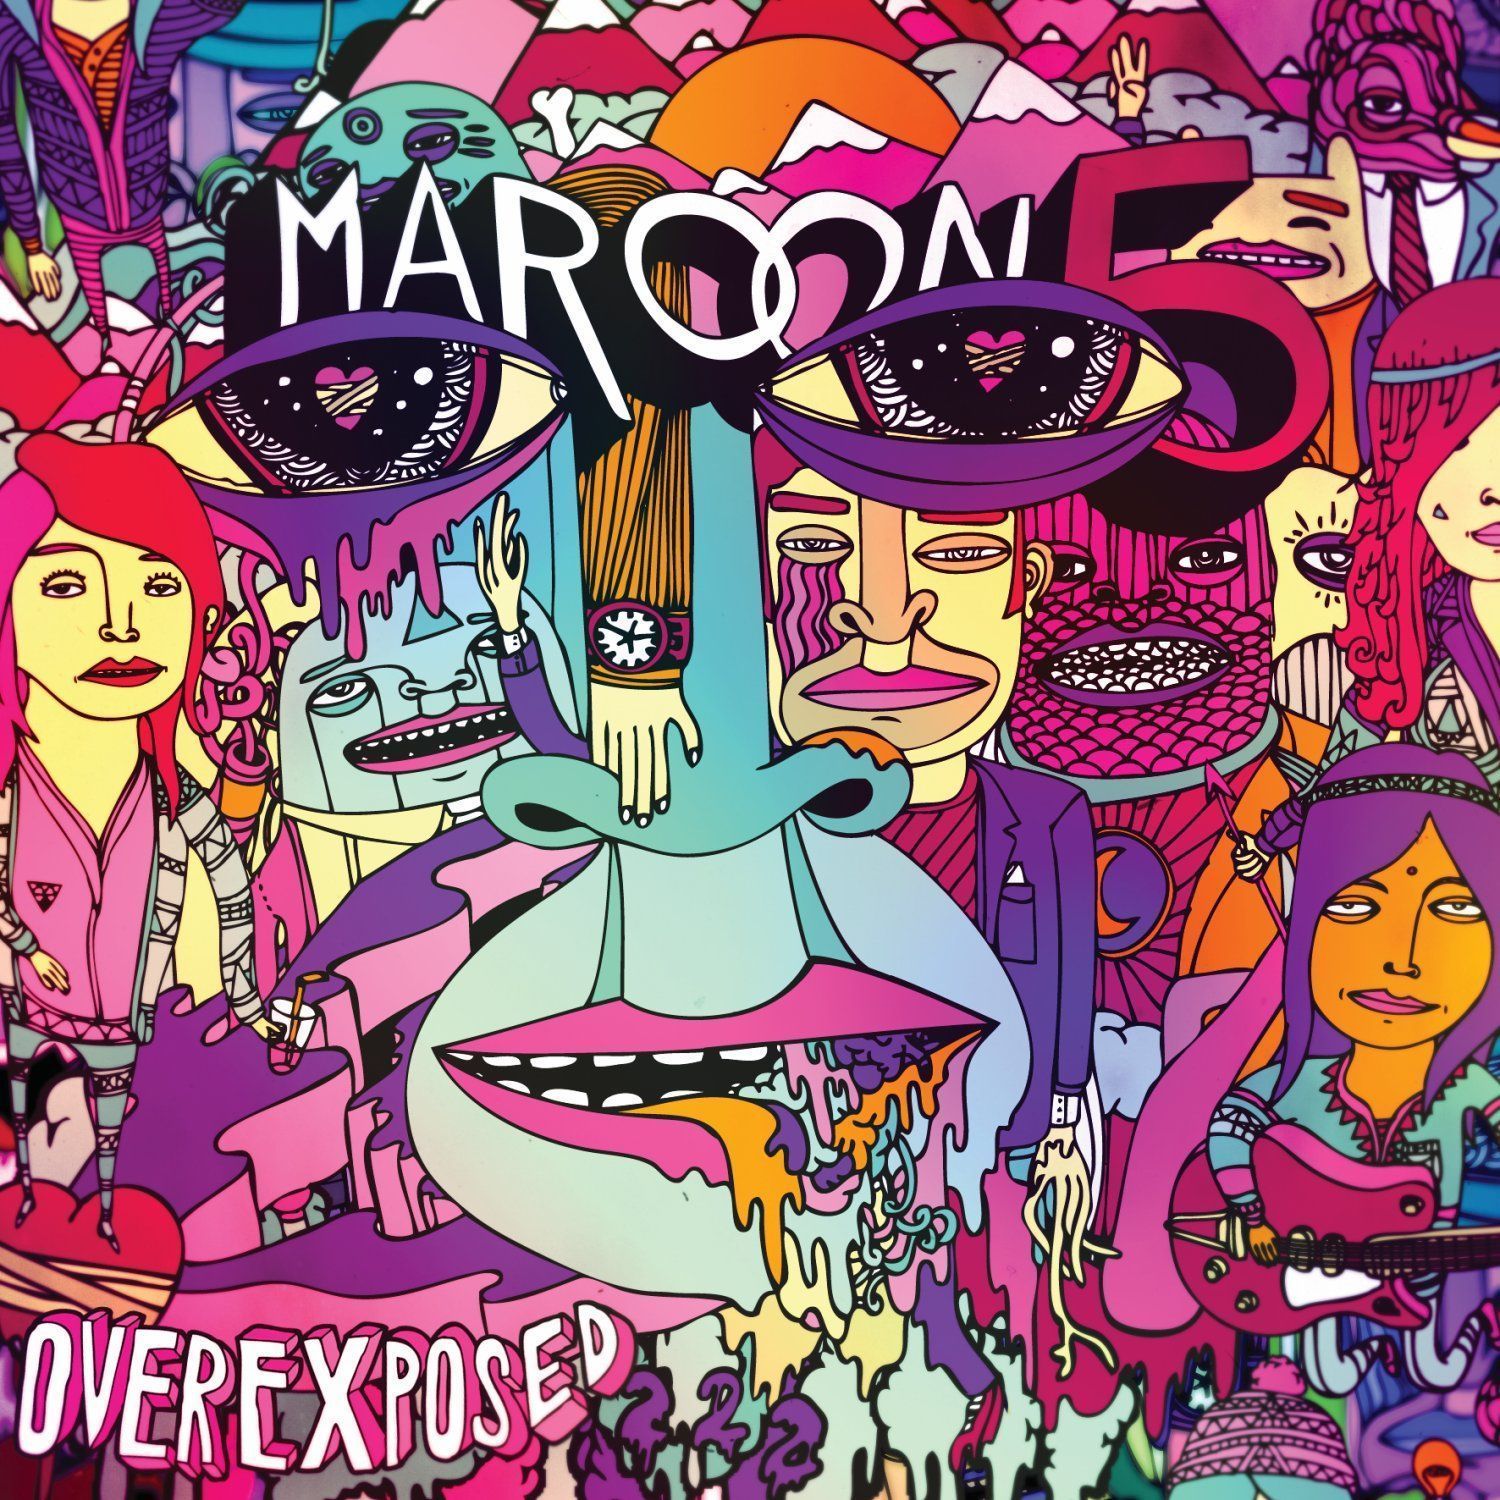 Overexposed - Maroon 5 Mp3 Songs Free Download | HD Wallpapers ...